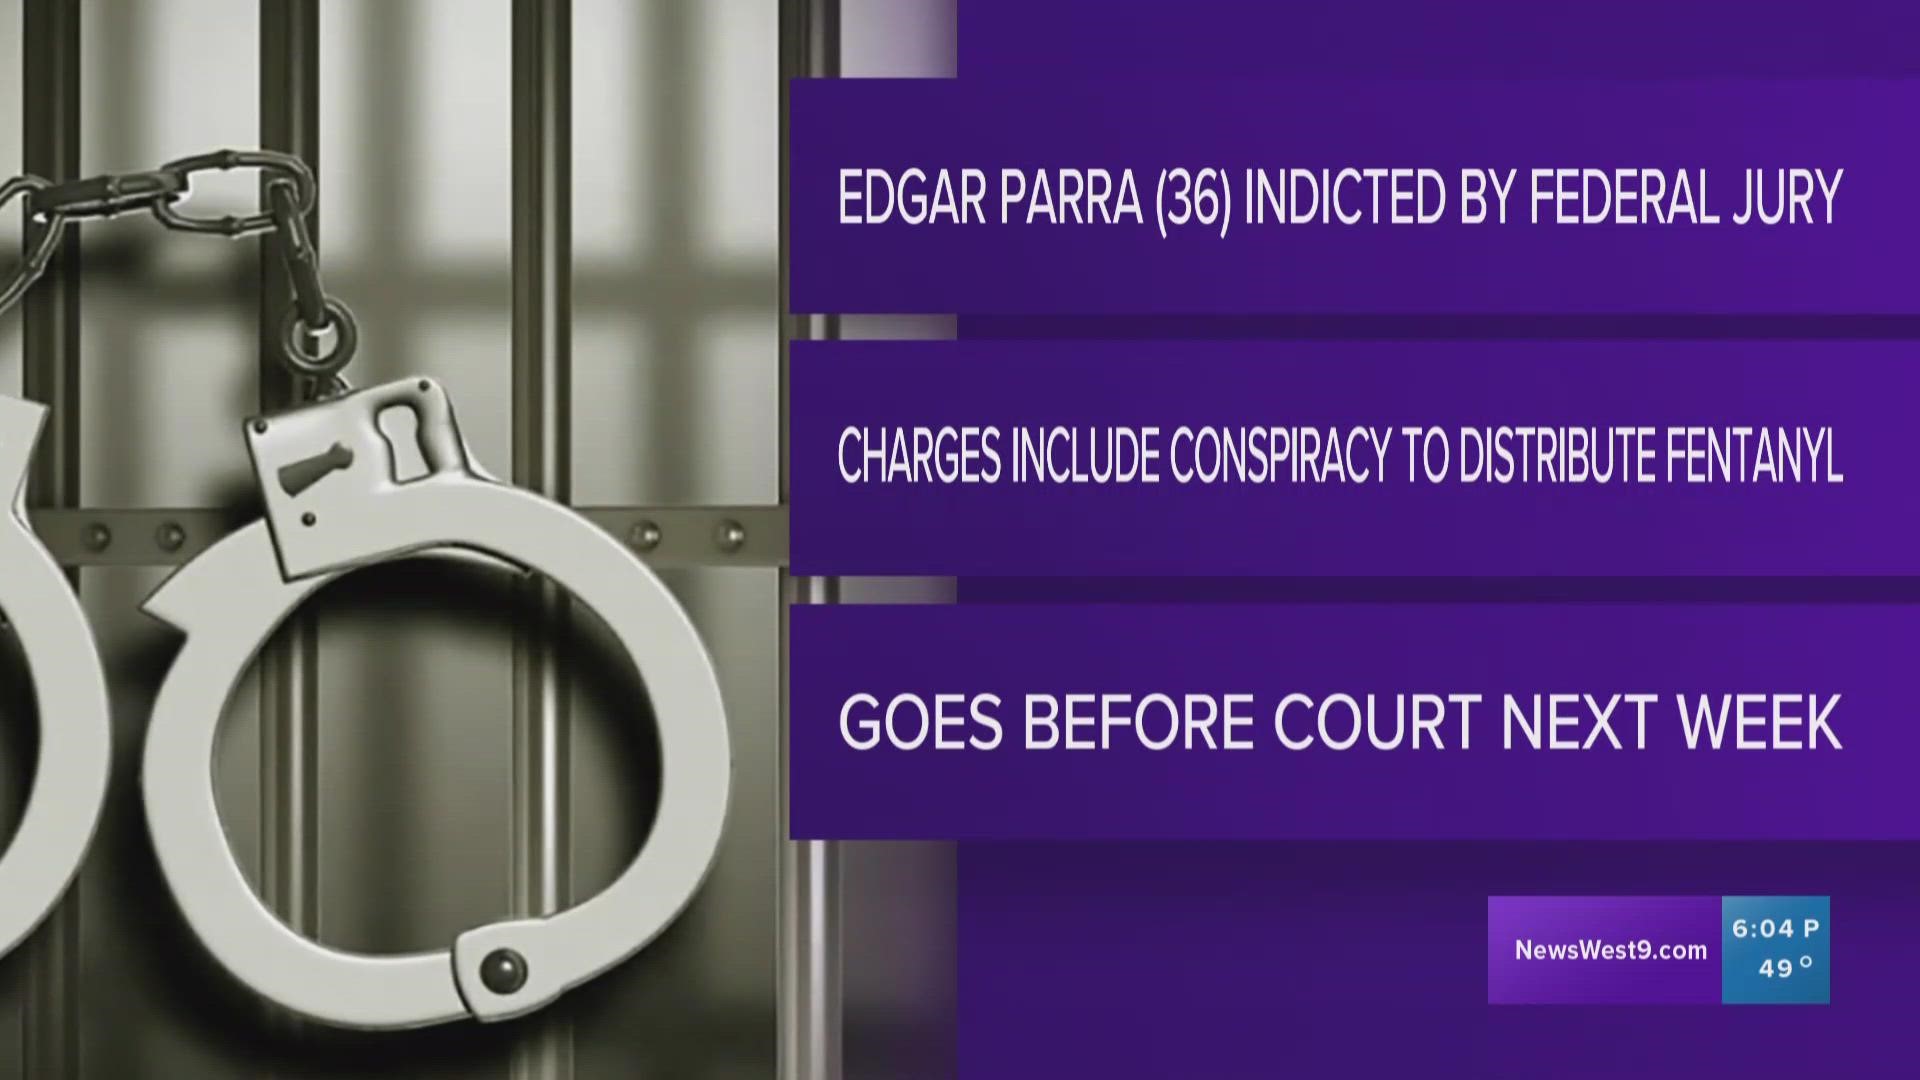 36-year-old Edgar Parra is scheduled for his initial court appearance on January 27, 2022.